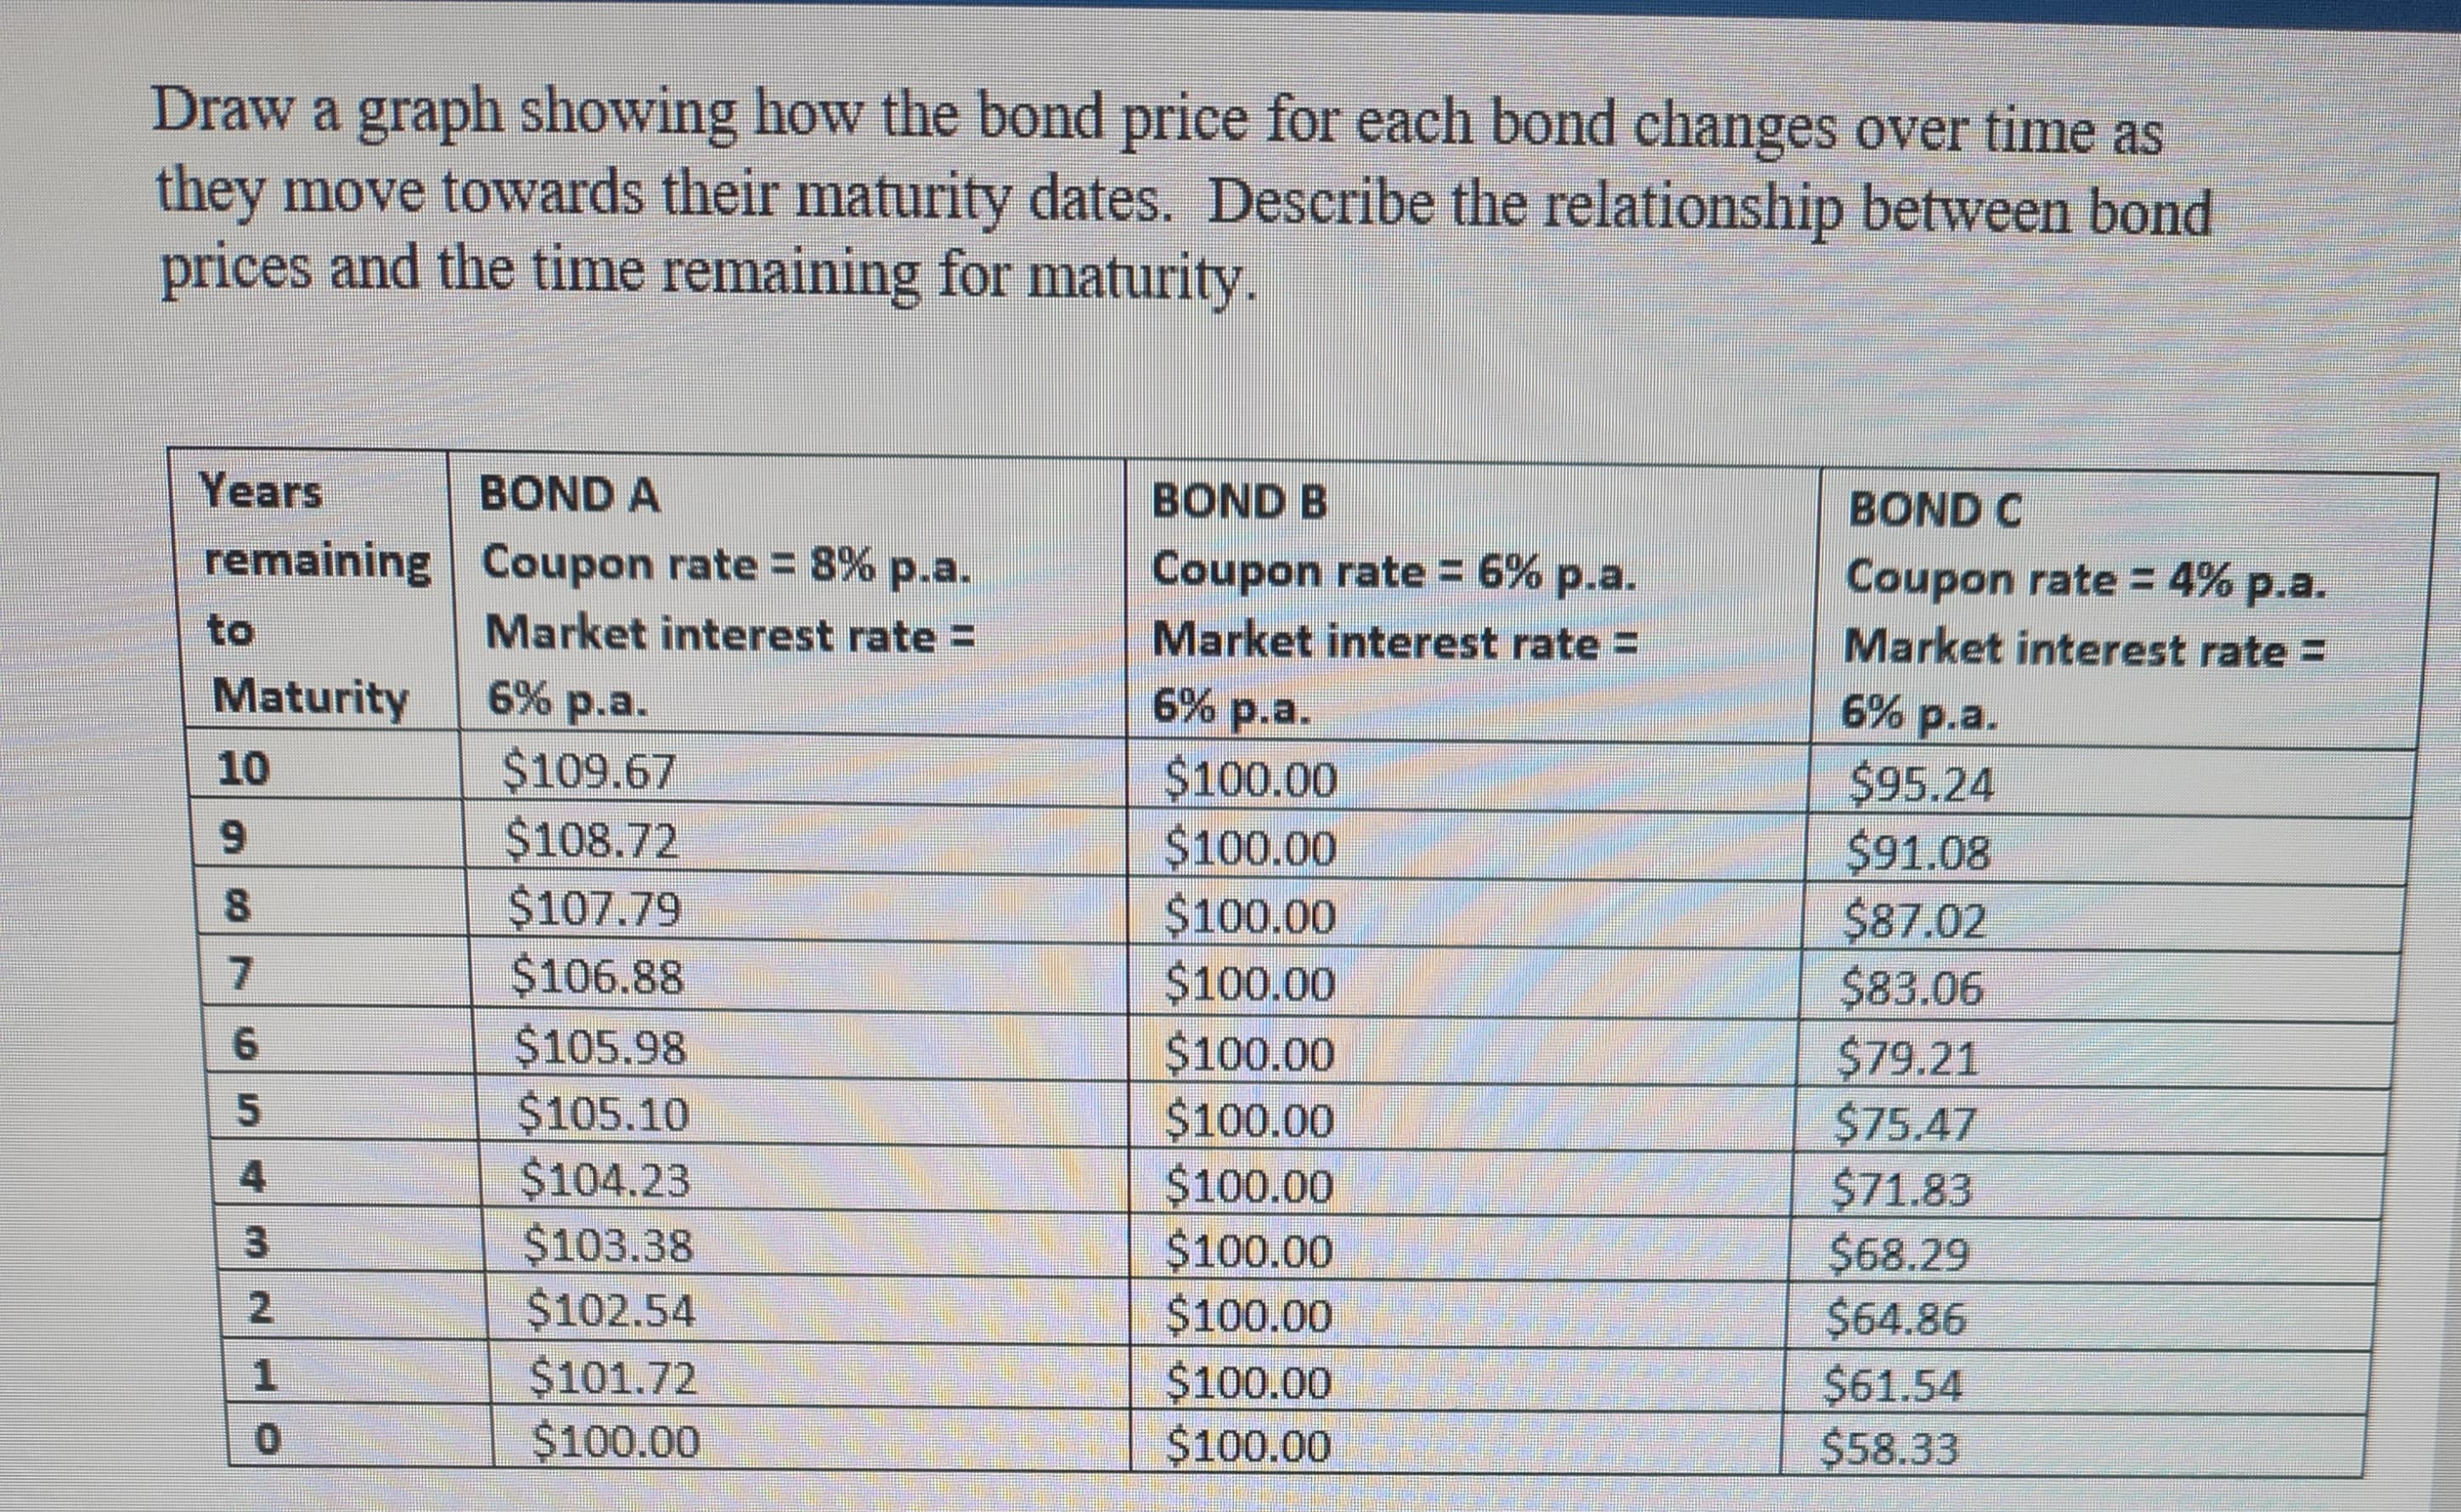 Draw a graph showing how the bond price for each bond changes over time as
they move towards their maturity dates. Describe the relationship between bond
prices and the time remaining for maturity.
Years
remaining
to
Maturity
10
9
8
0765 40 NA
3
2
0
BOND A
Coupon rate = 8% p.a.
Market interest rate =
6% p.a.
$109.67
$108.72
$107.79
$106.88
$105.98
$105.10
$104.23
$103.38
$102.54
$101.72
$100.00
BOND B
Coupon rate = 6% p.a.
Market interest rate =
6% p.a.
$100.00
$100.00
$100.00
$100.00
$100.00
$100.00
$100.00
$100.00
$100.00
$100.00
$100.00
BOND C
Coupon rate = 4% p.a.
Market interest rate =
6% p.a.
$95.24
$91.08
$87.02
$83.06
$79.21
$75.47
$71.83
$68.29
$64.86
$61.54
$58.33